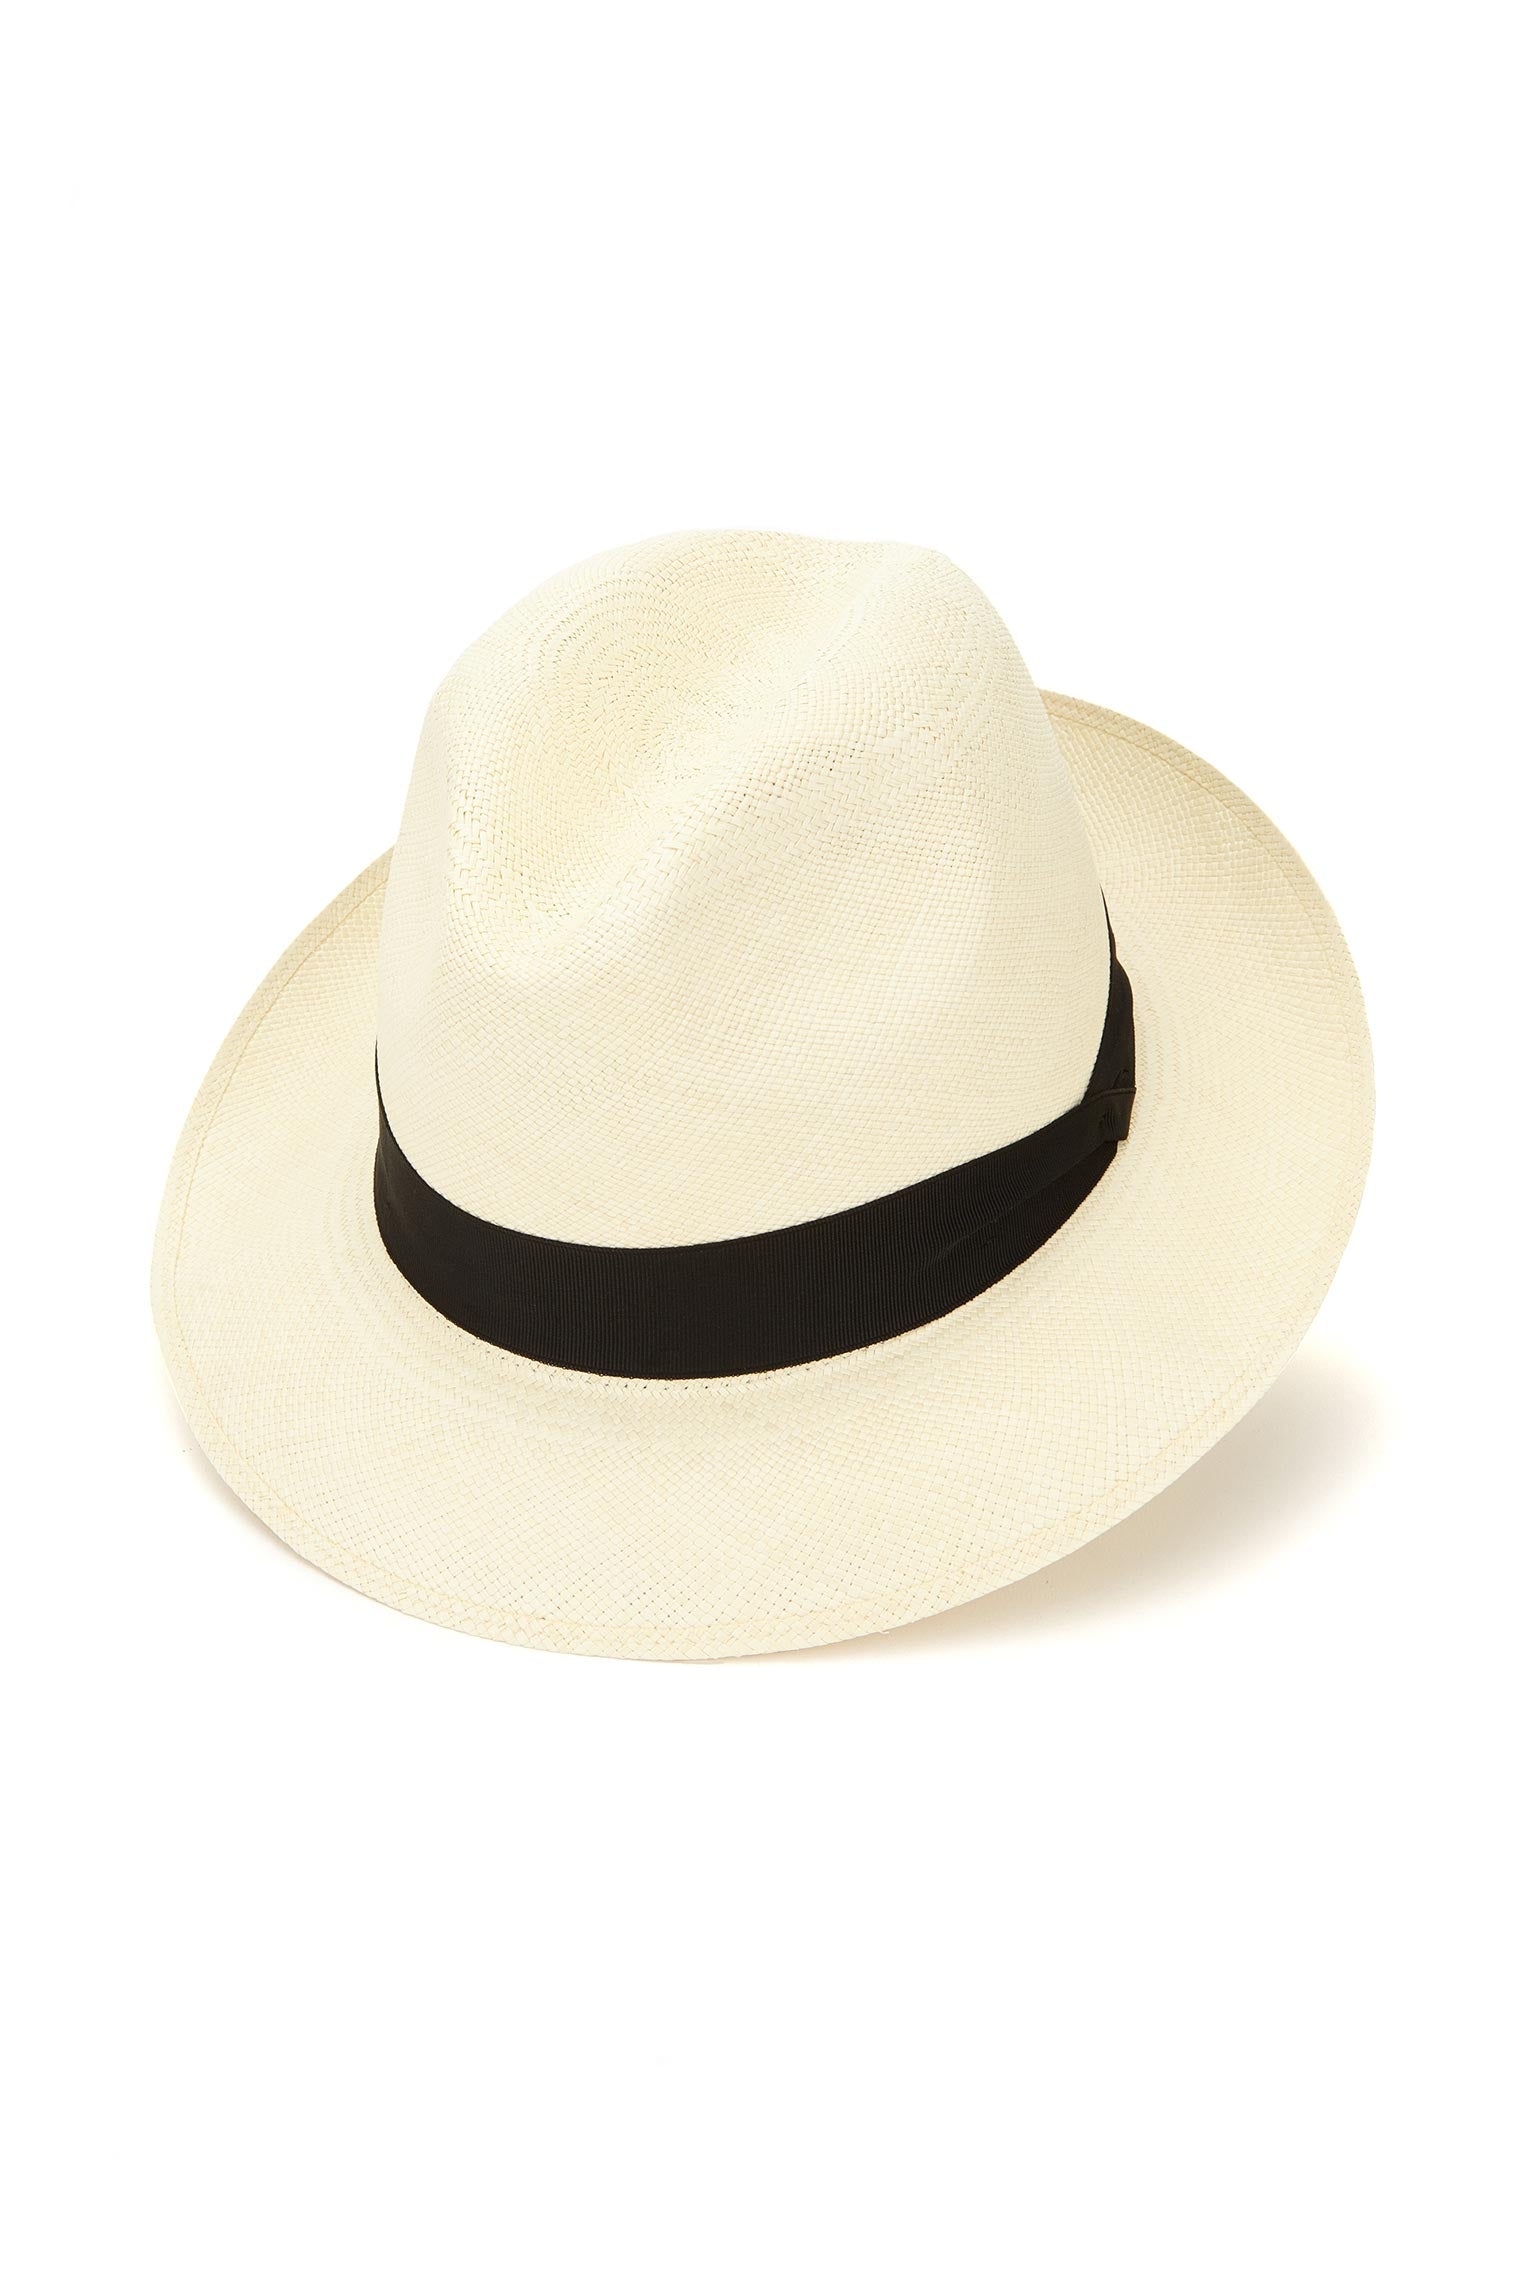 Classic Panama - Father's Day Gift Guide - Lock & Co. Hatters London UK